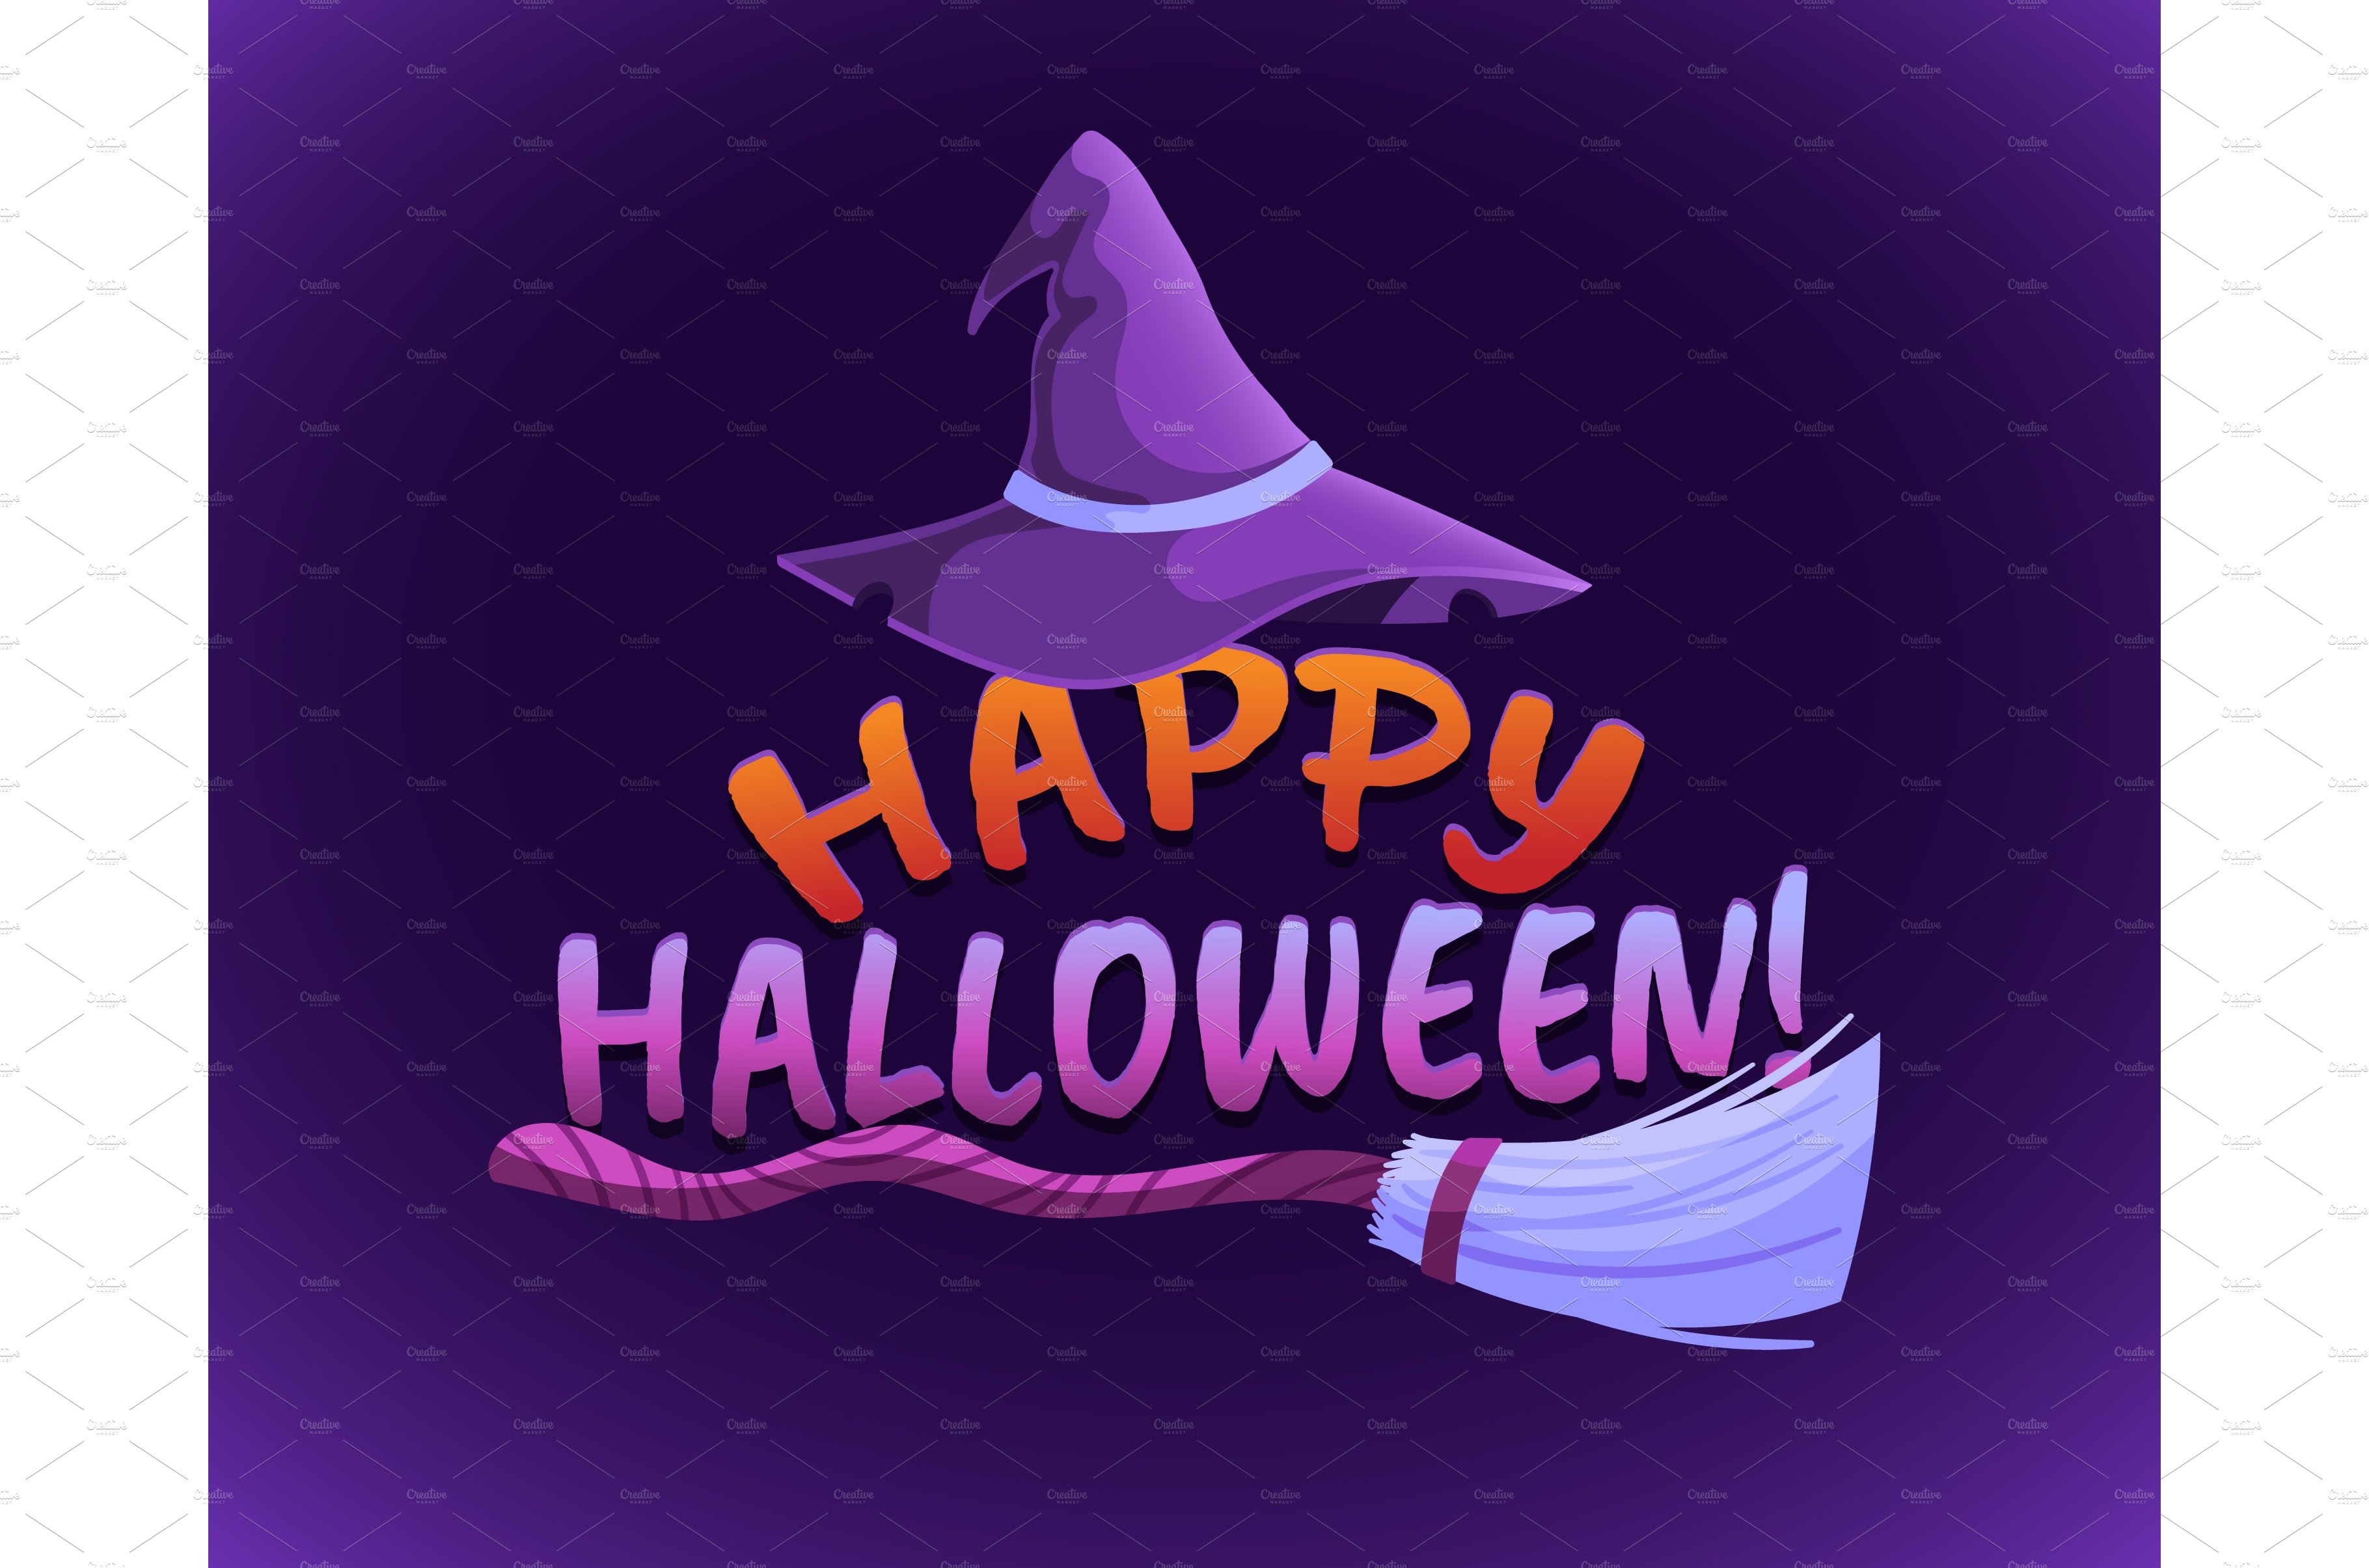 Happy Halloween banner. Card with cover image.